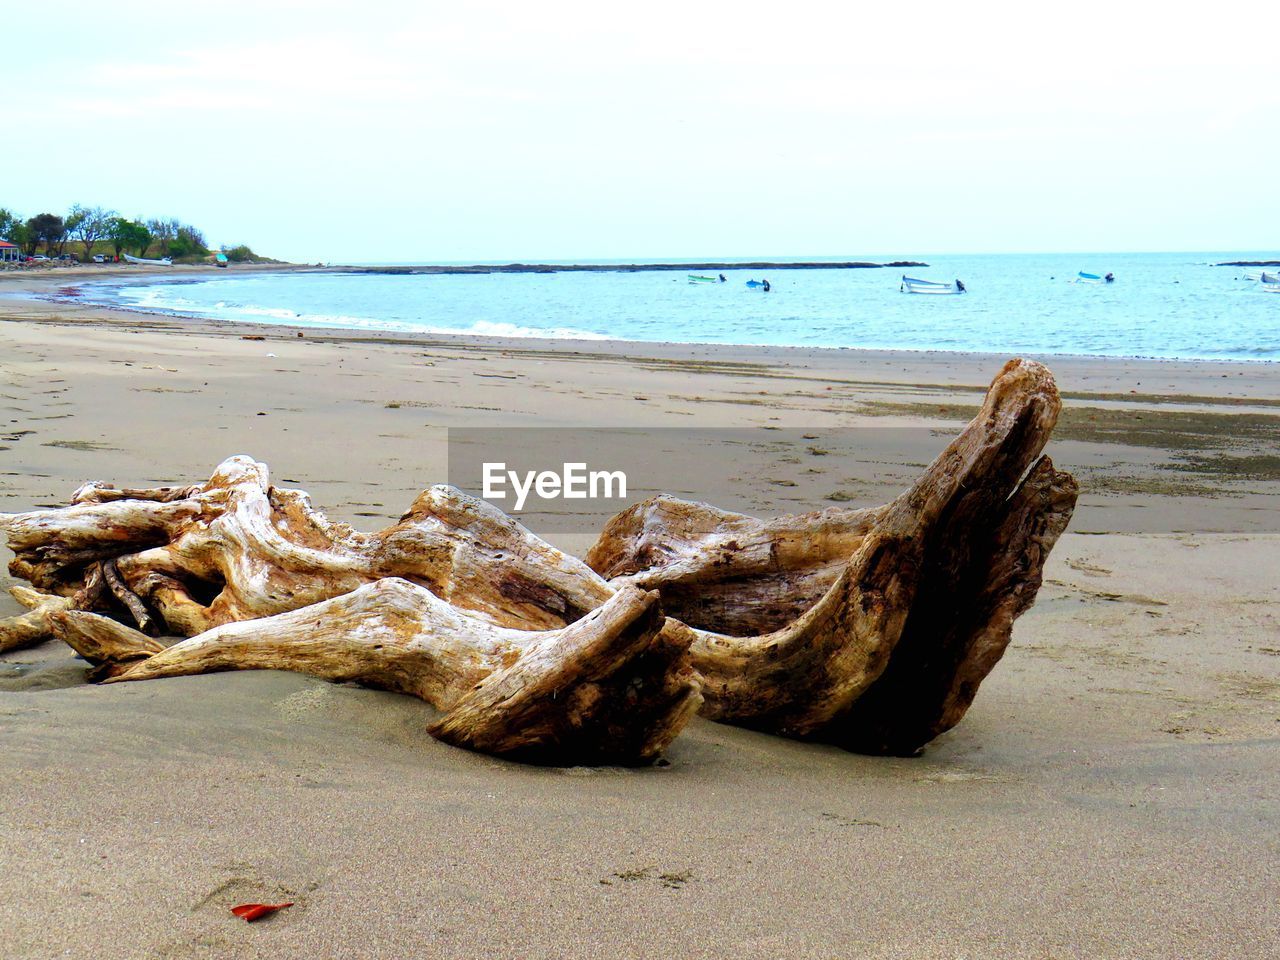 VIEW OF DRIFTWOOD ON BEACH